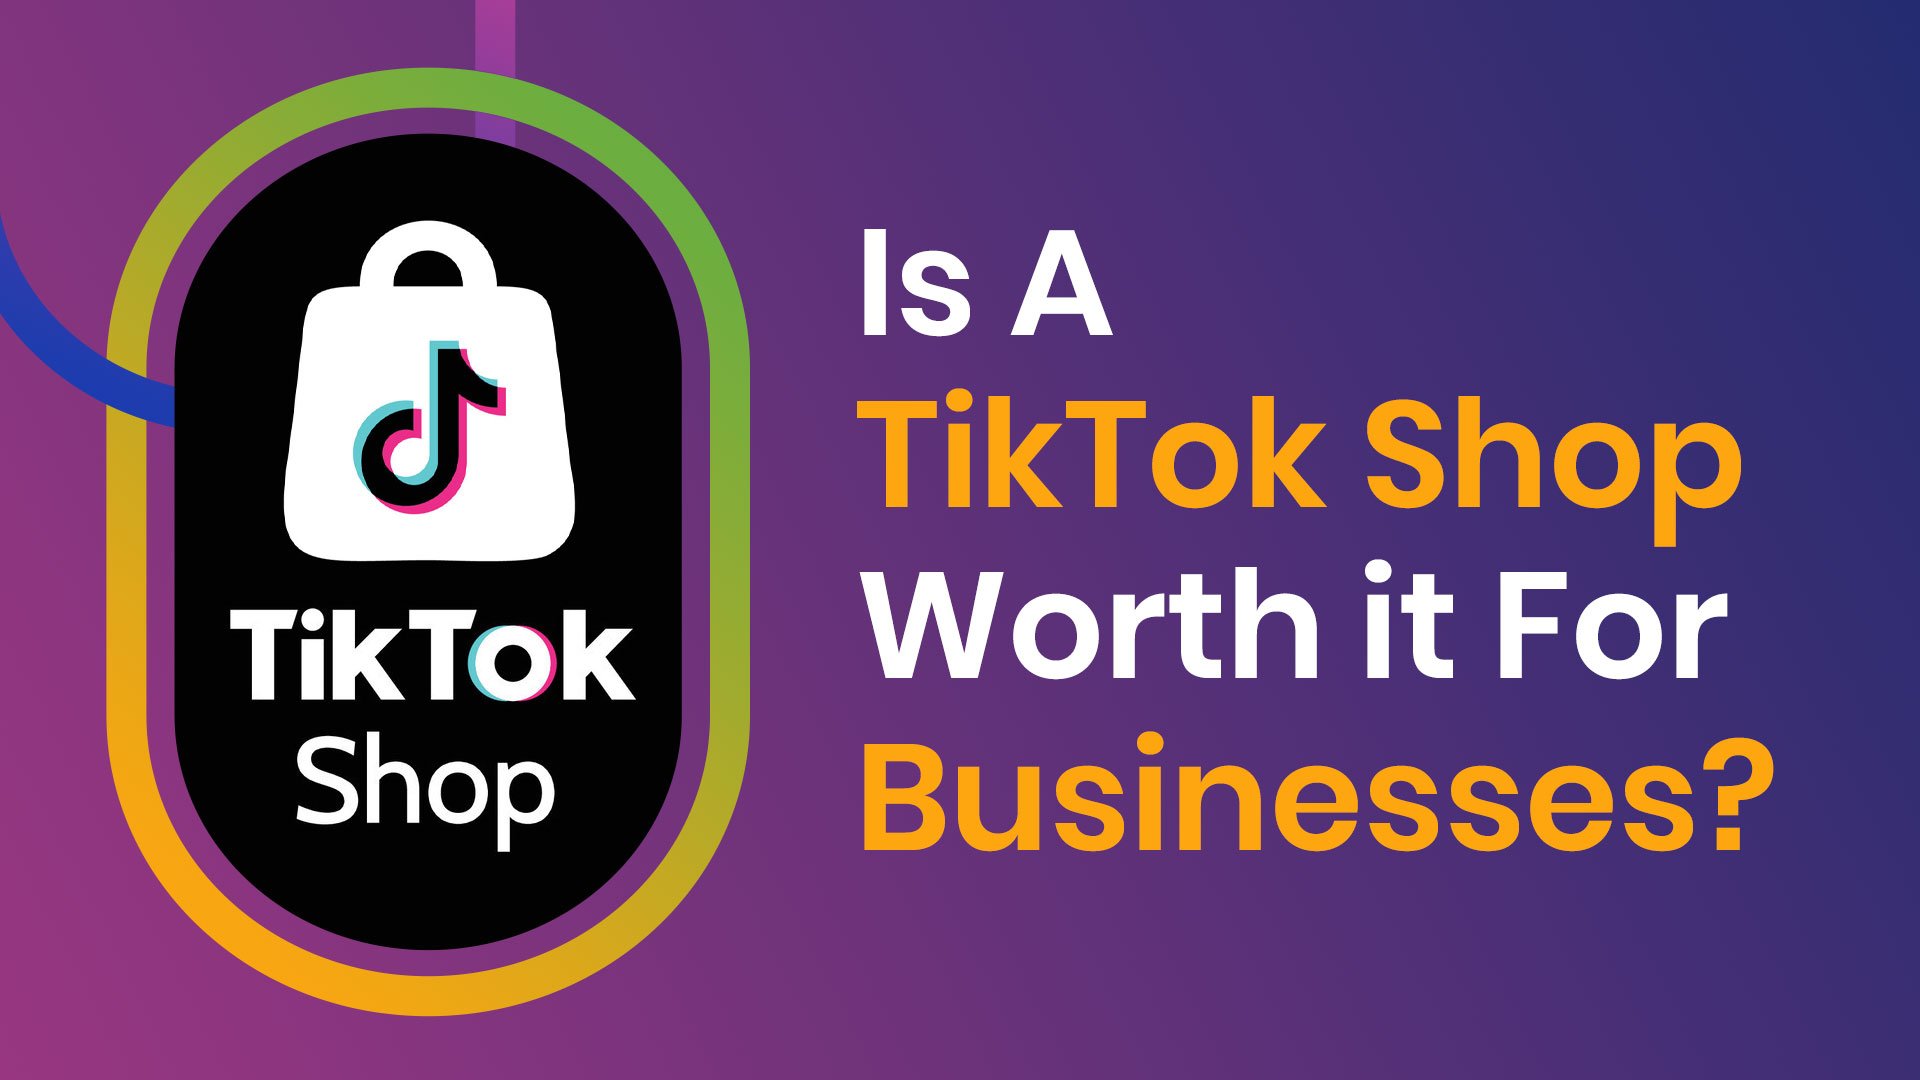 Is A TikTok Shop Worth it For Businesses? - is a tiktok shop worth it for businesses